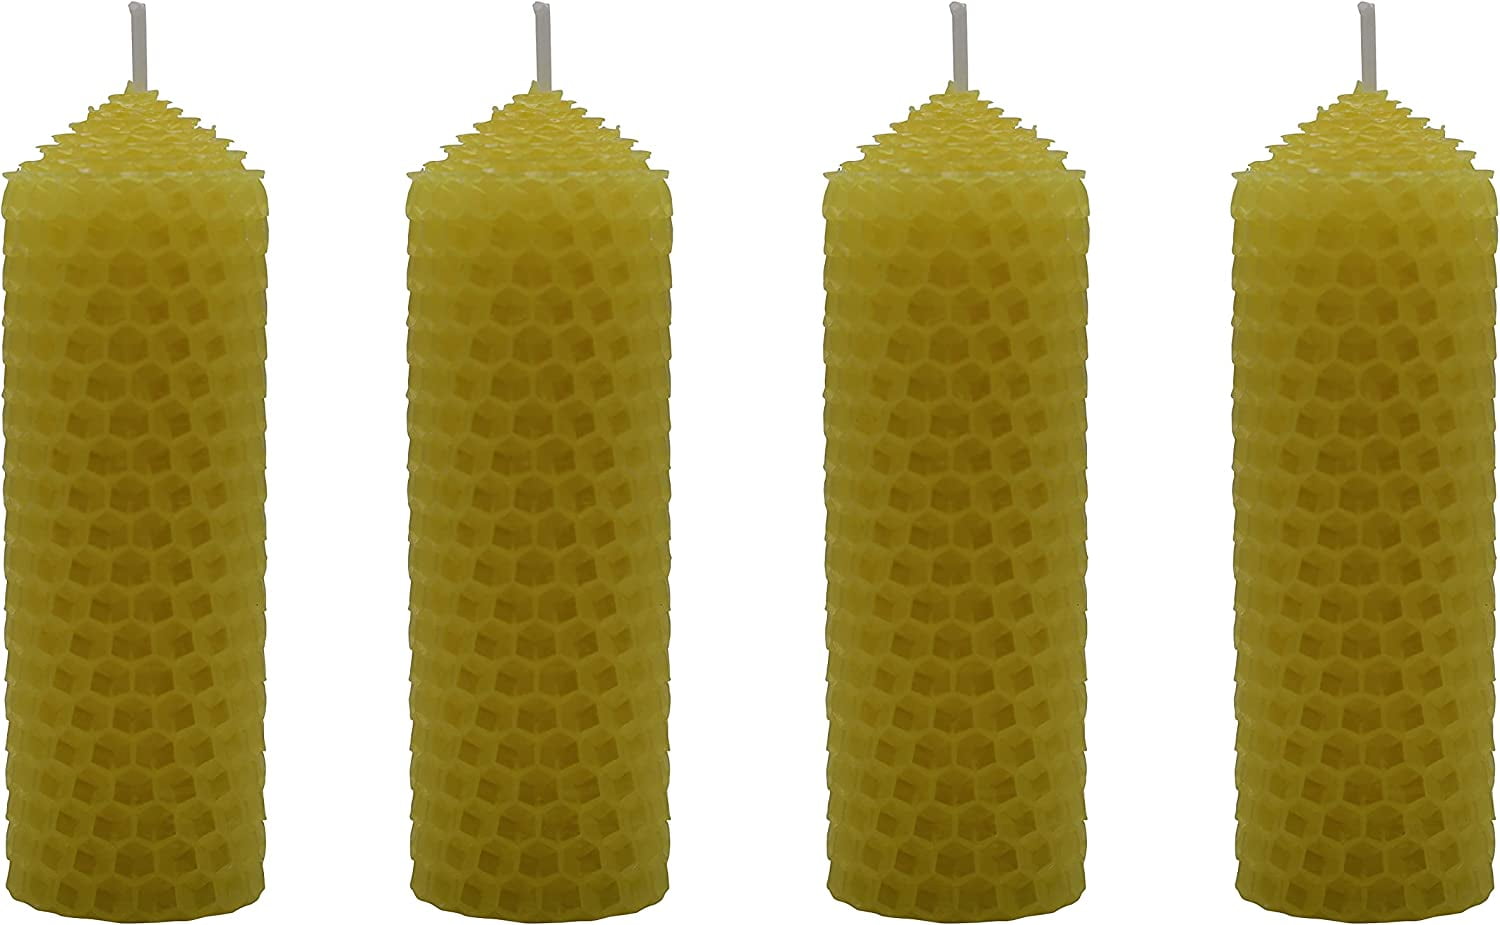 4″ Pure Beeswax Rolled Pillar Candle